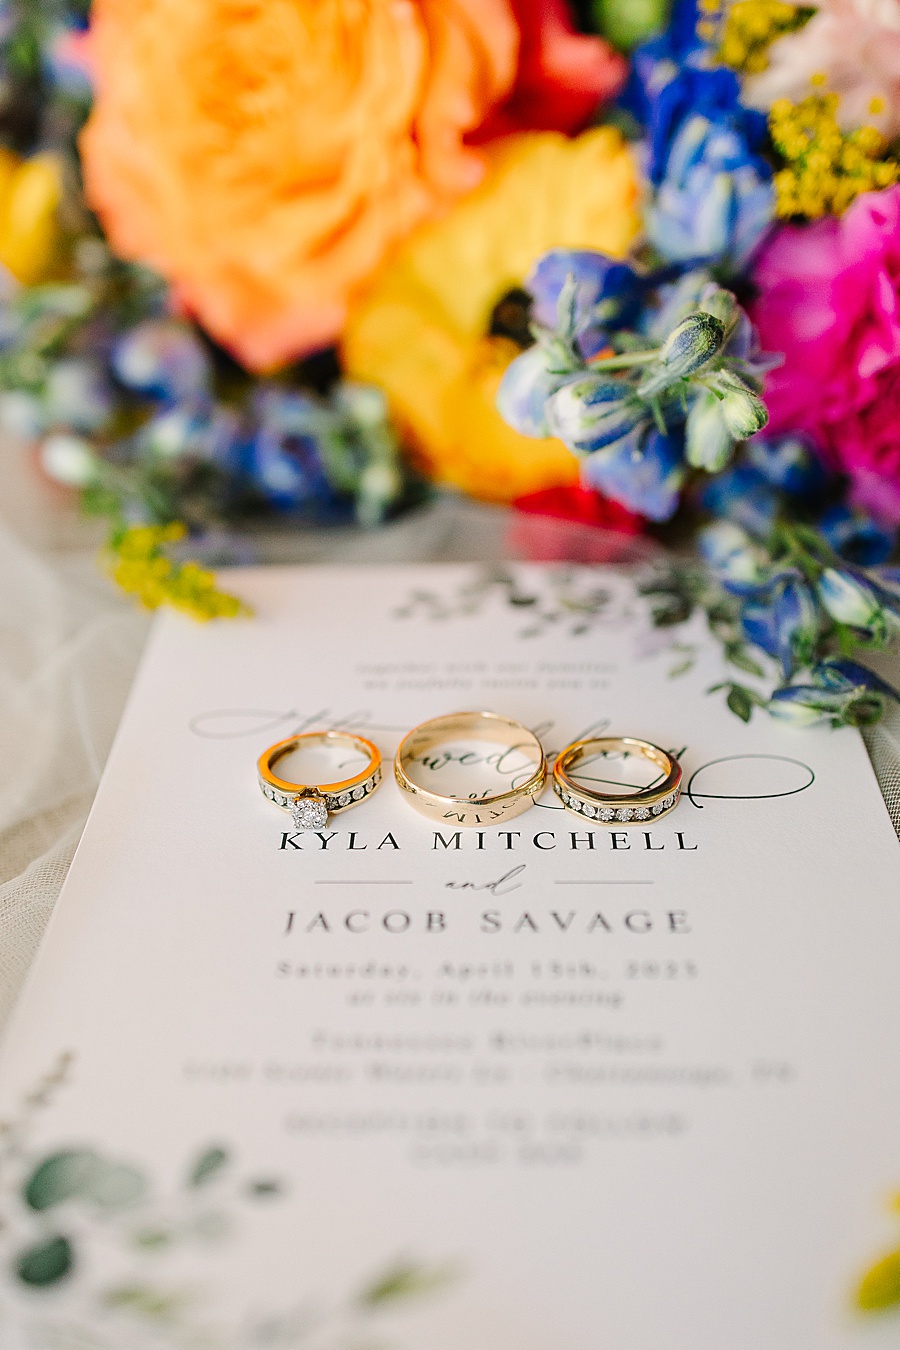 Gold wedding rings on invitation with colorful wedding bouquet